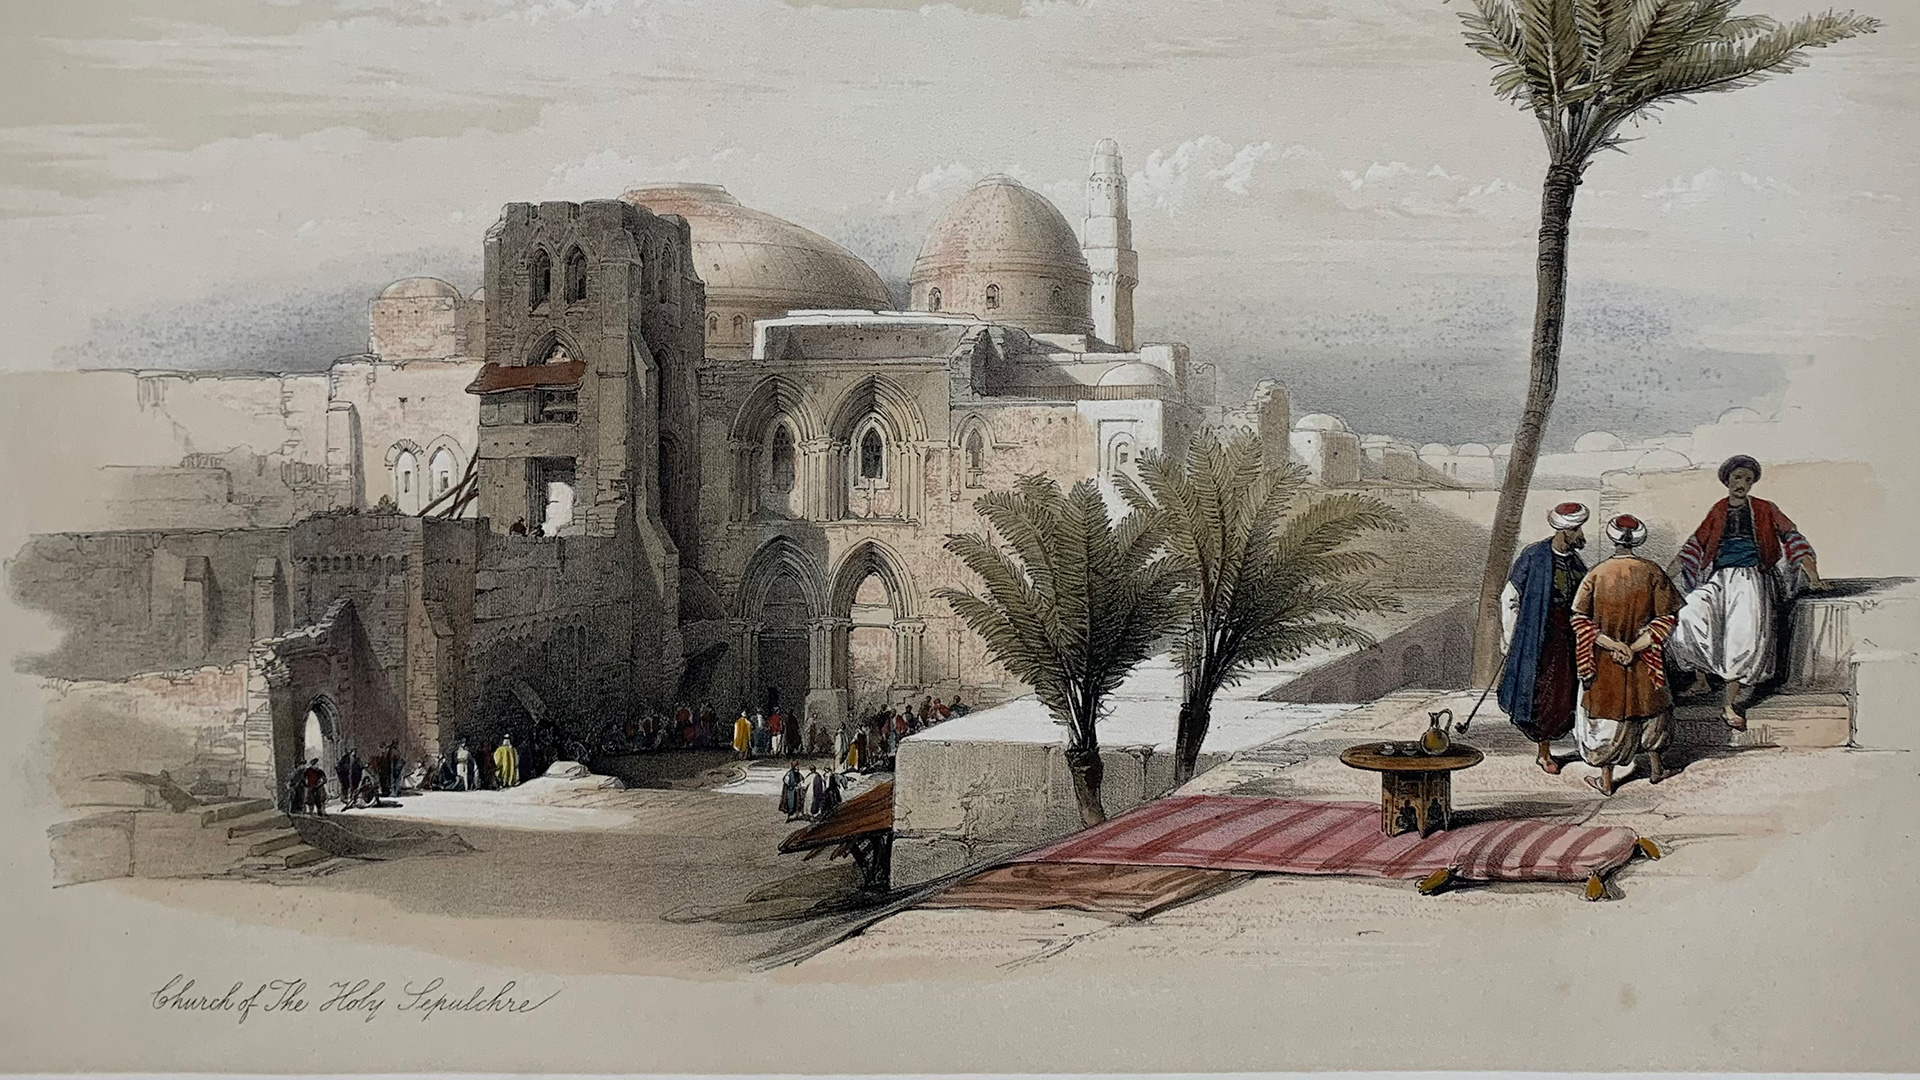 Church of the Holy Sepulcher litograph by David Roberts.